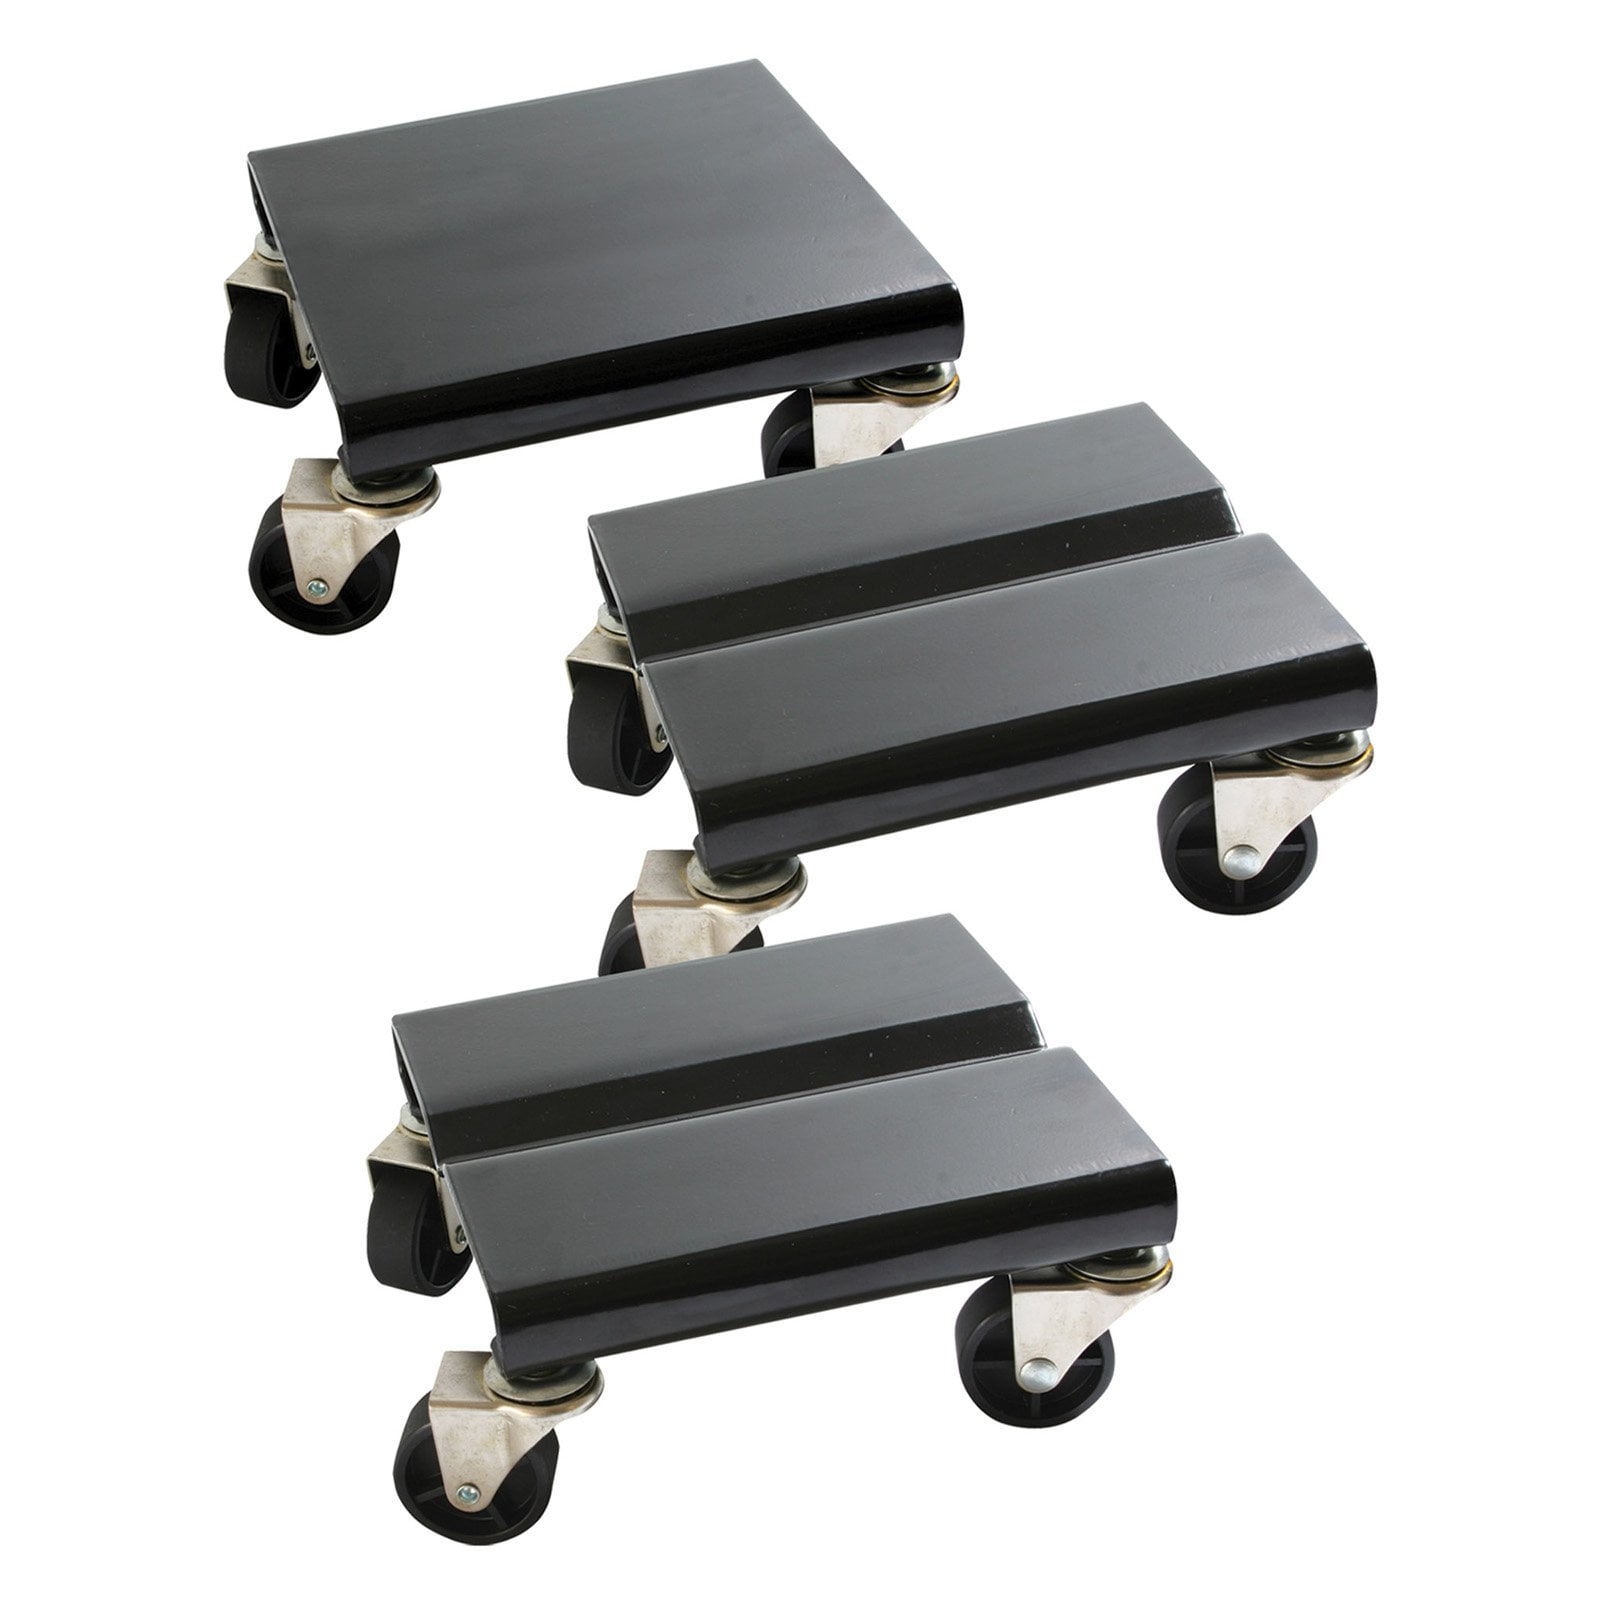 160 lbs Capacity Three-Wheel Dollies 4 Pack Dolly Furniture Appliance Mover 